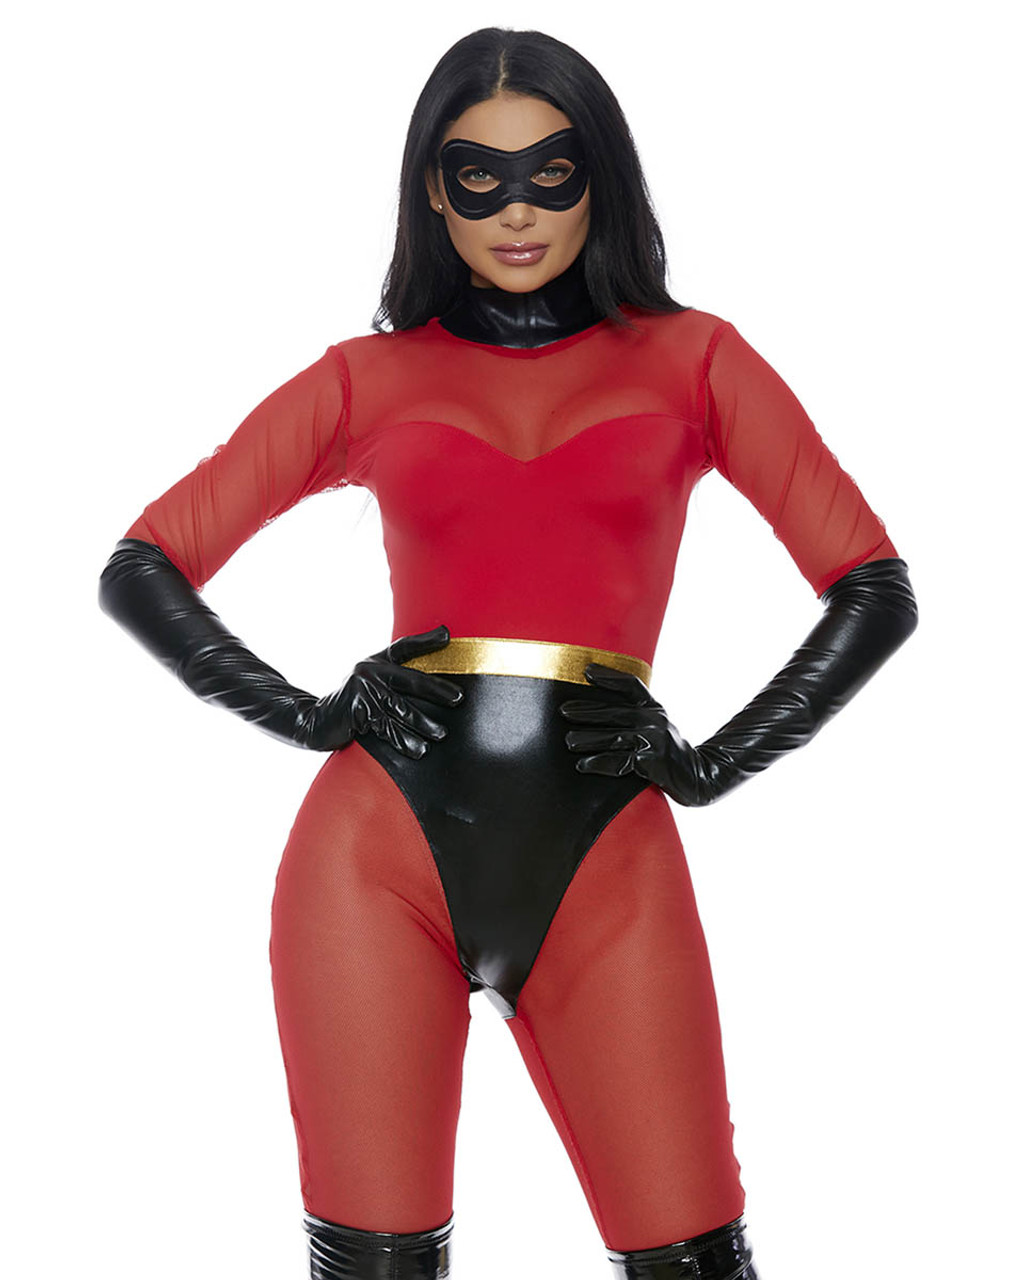 Superhero Costumes Kids Will Love: Costumes for Boys and Girls